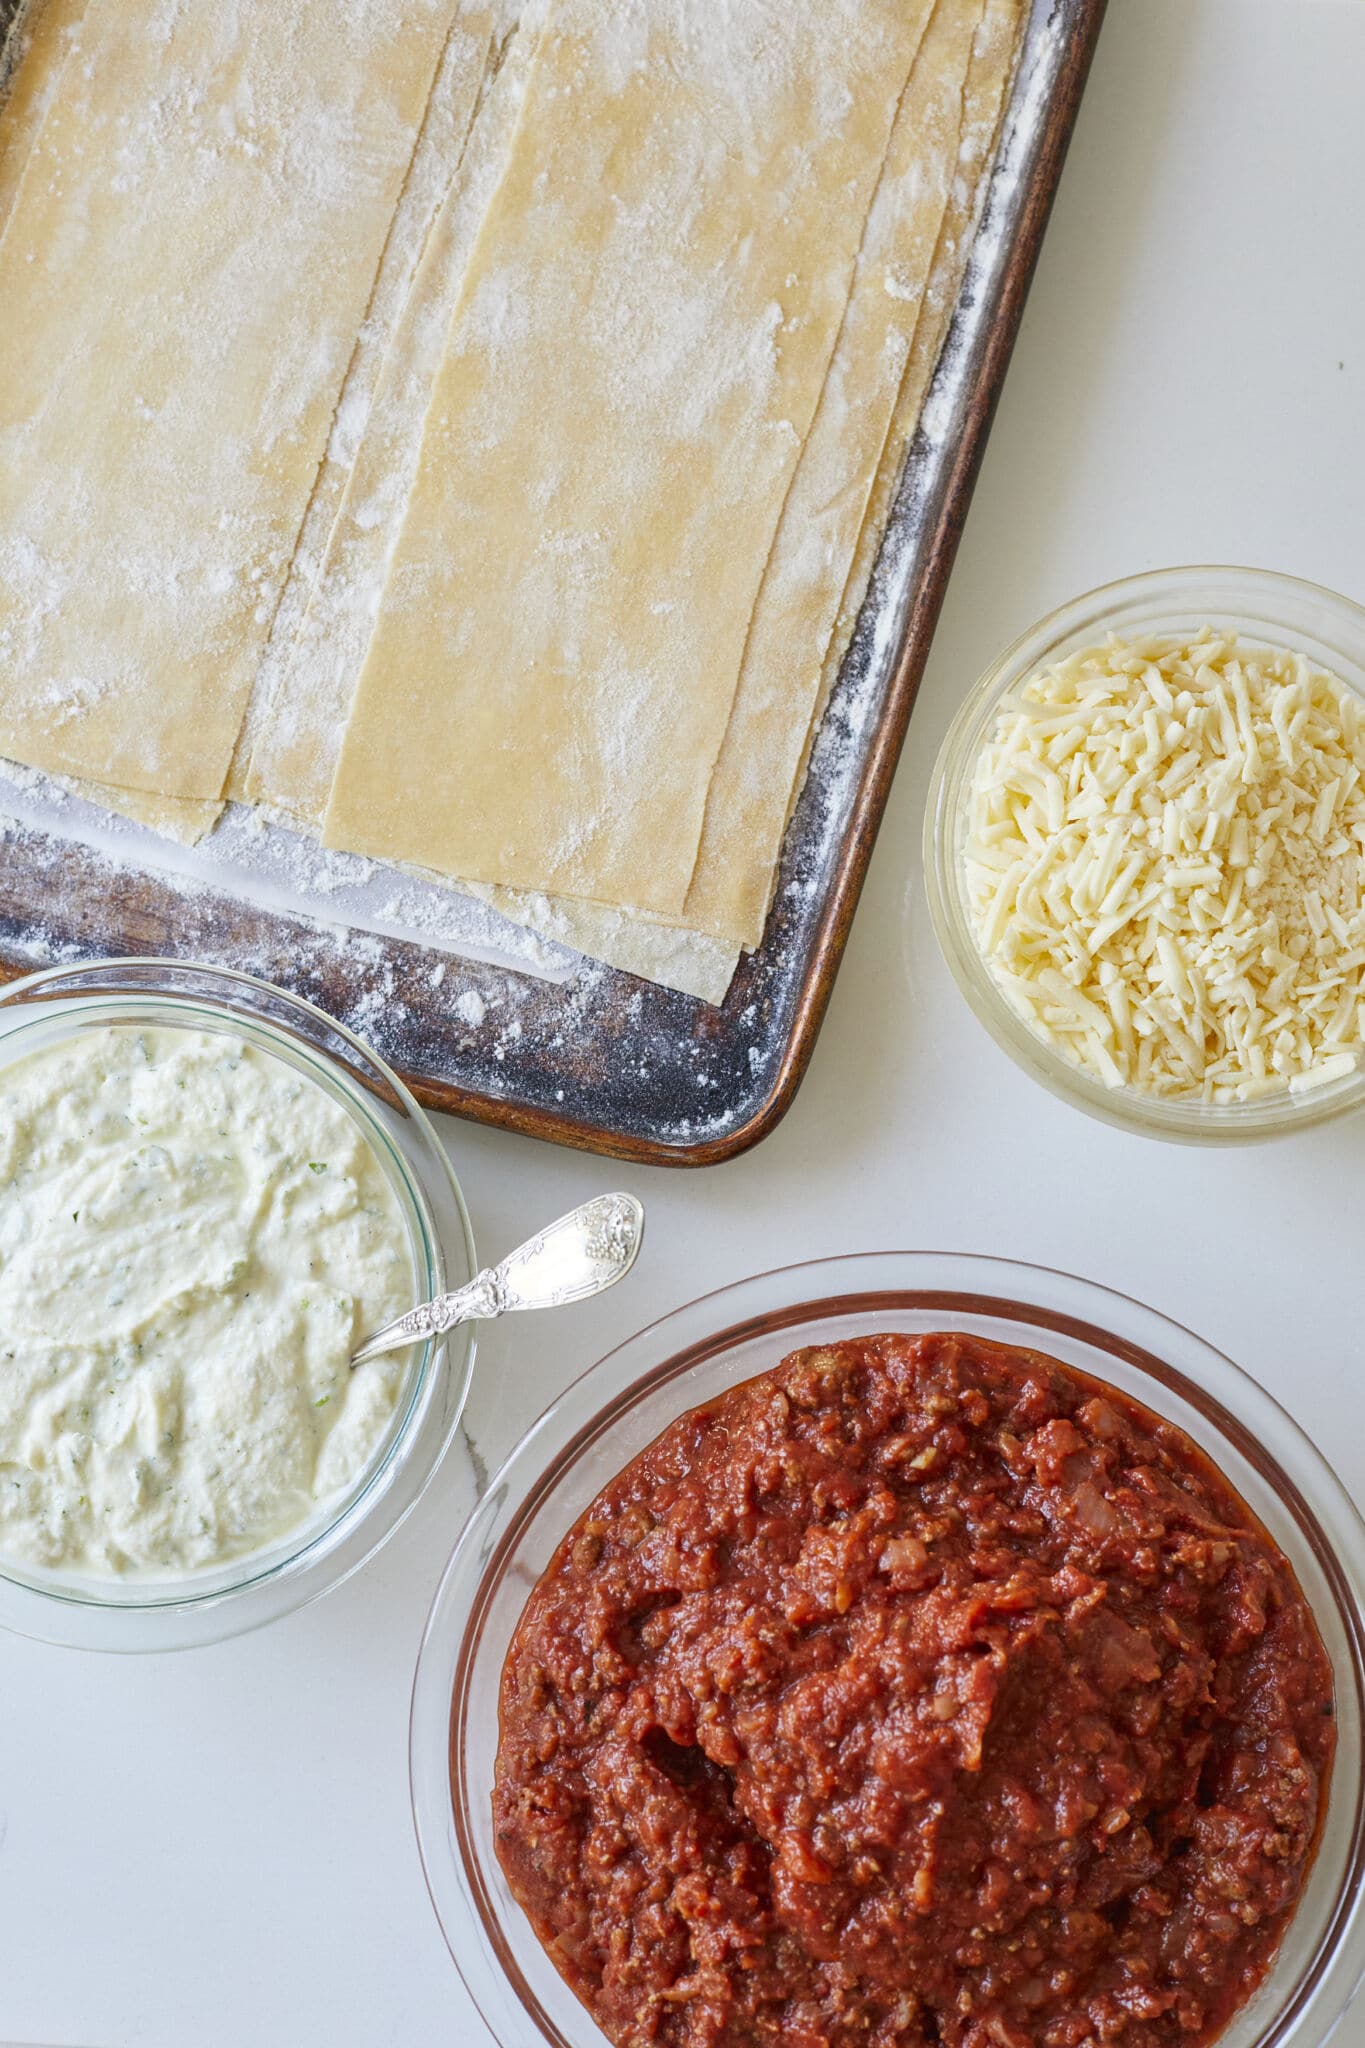 The Best Lasagna Recipe (100% From Scratch!) Ingredients 